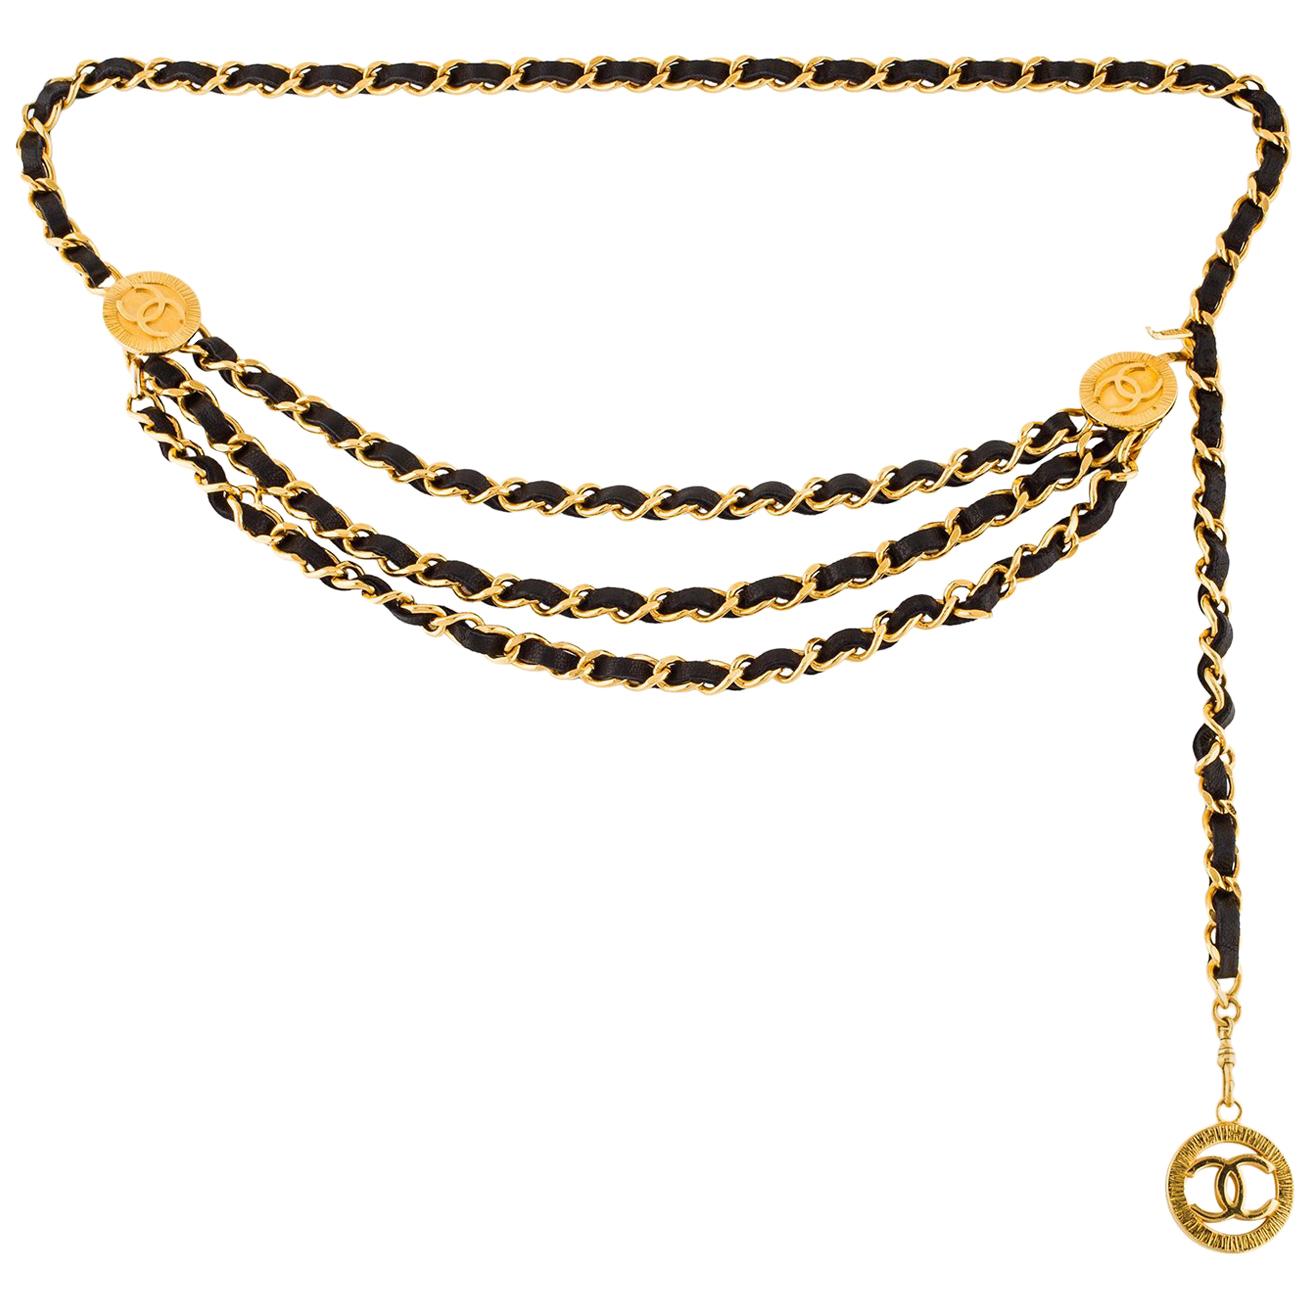 1980s Chanel Triple Strand Leather Chain Belt